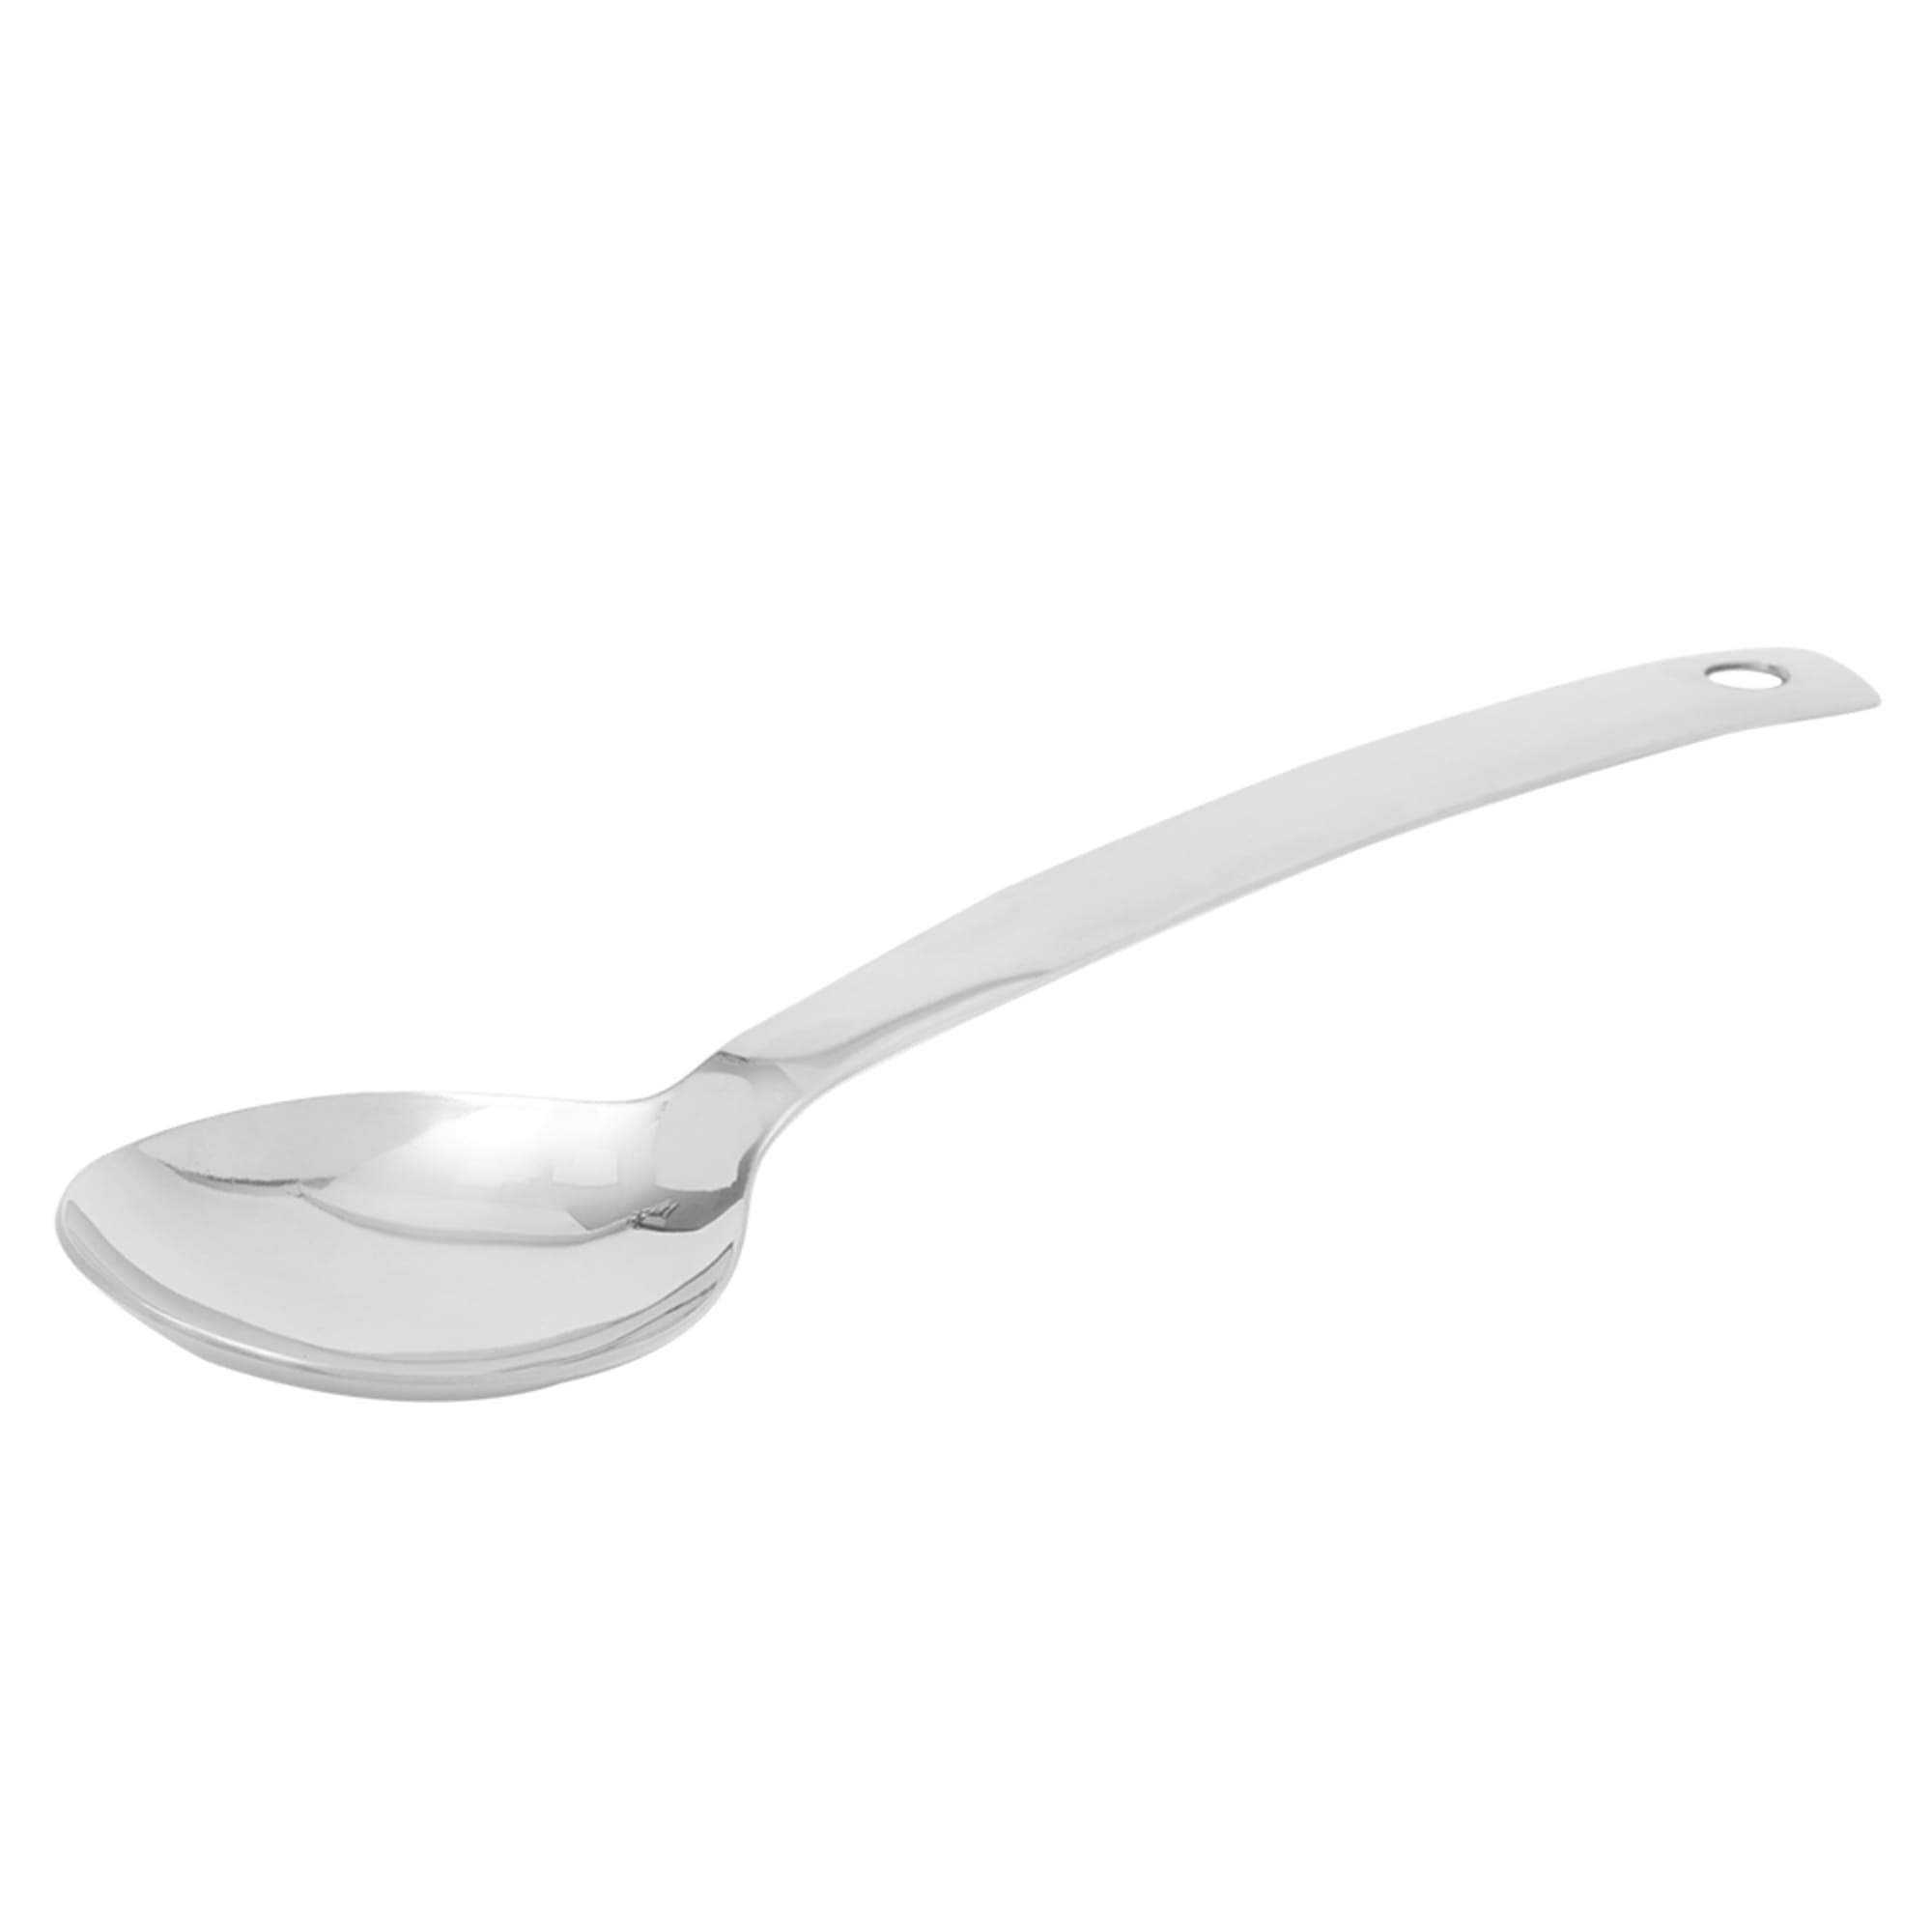 Home Basics Stainless Steel Aster Solid Spoon $2.00 EACH, CASE PACK OF 24